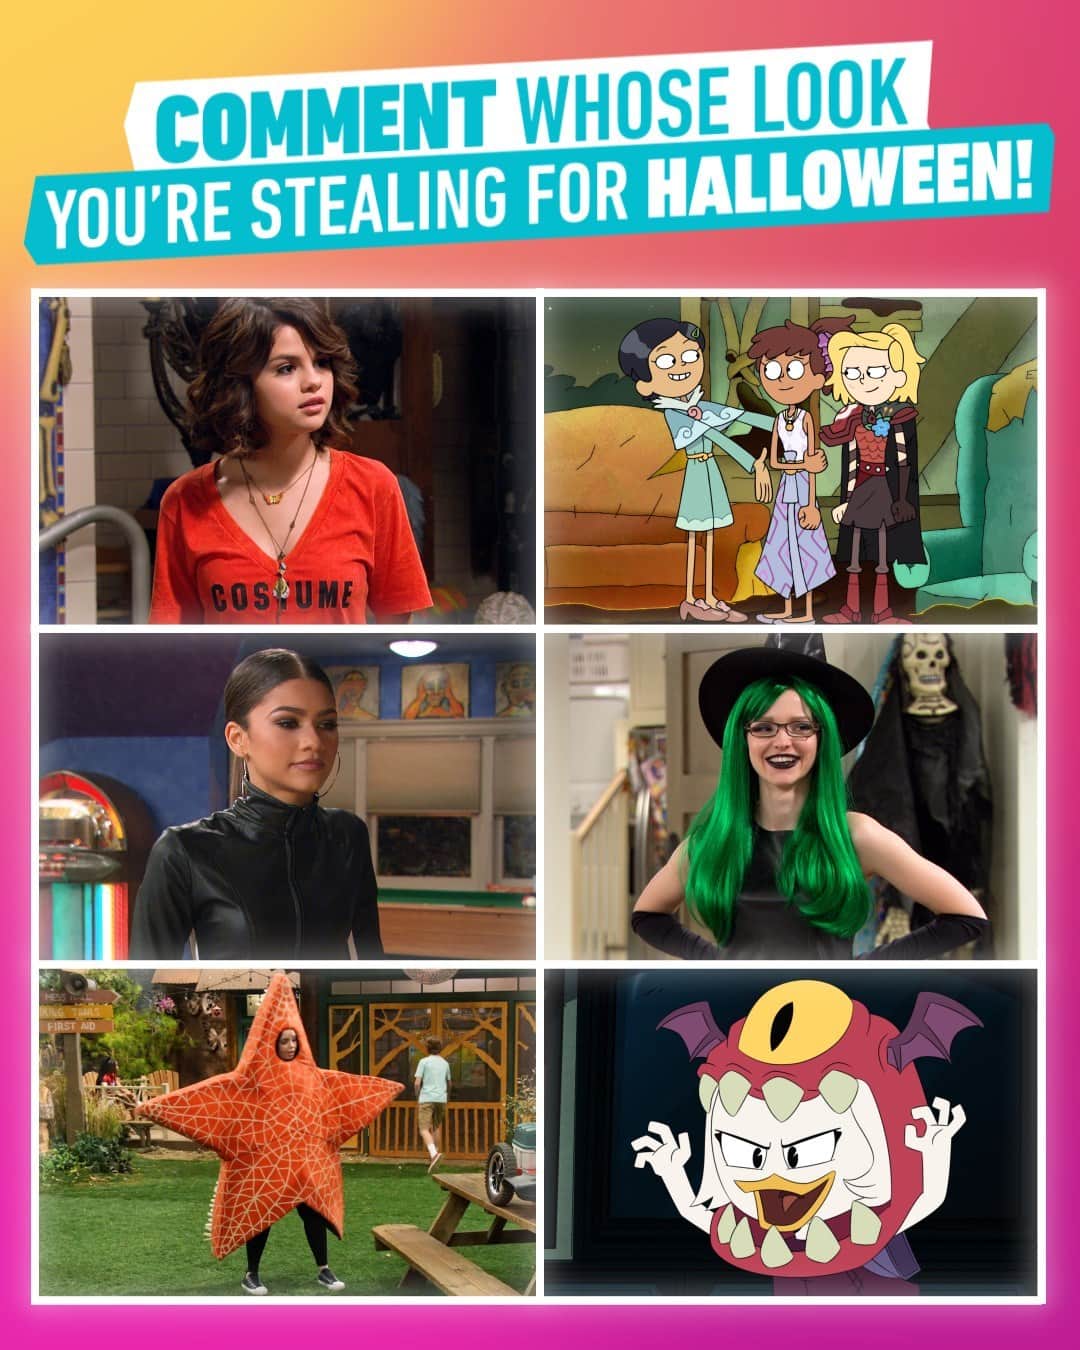 Disney Channelのインスタグラム：「Our #DisneyChannel friends are known for epic Halloween looks 🎃 Comment whose look you're stealing for Halloween! #WatchOnDisneyChannel」